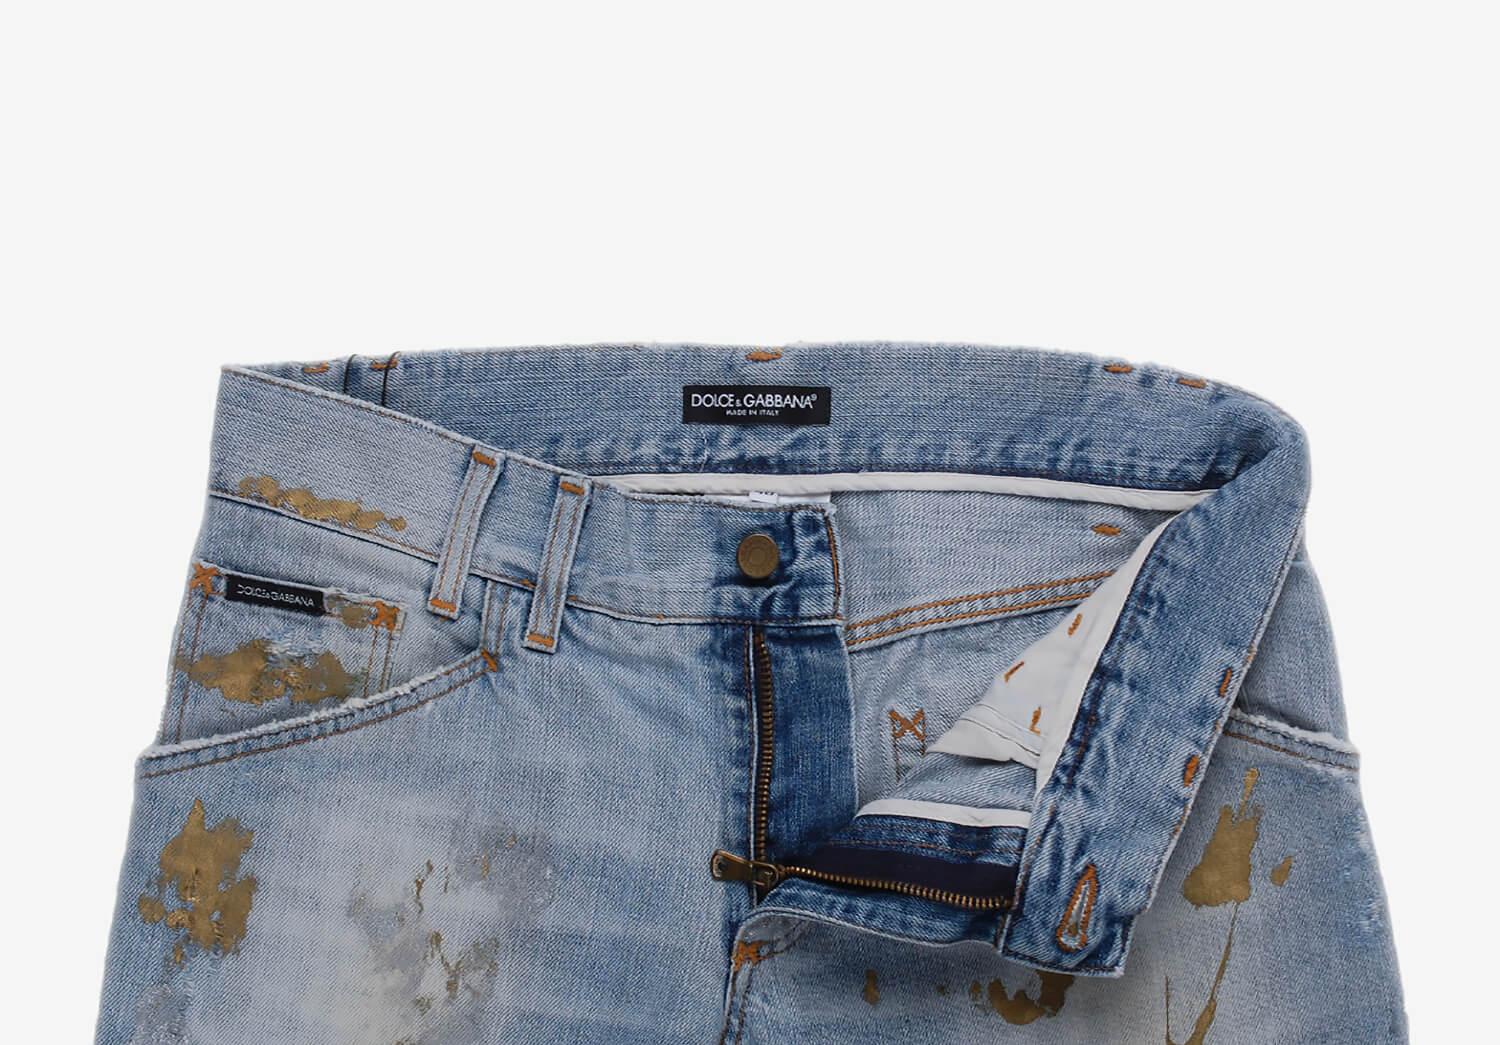 Item for sale is 100% genuine Dolce&Gabbana Mainline Painter Jeans
Color: Blue
(An actual color may a bit vary due to individual computer screen interpretation)
Material: 100% cotton
Tag size: ITA48, runs W31/32
These jeans are great quality item.